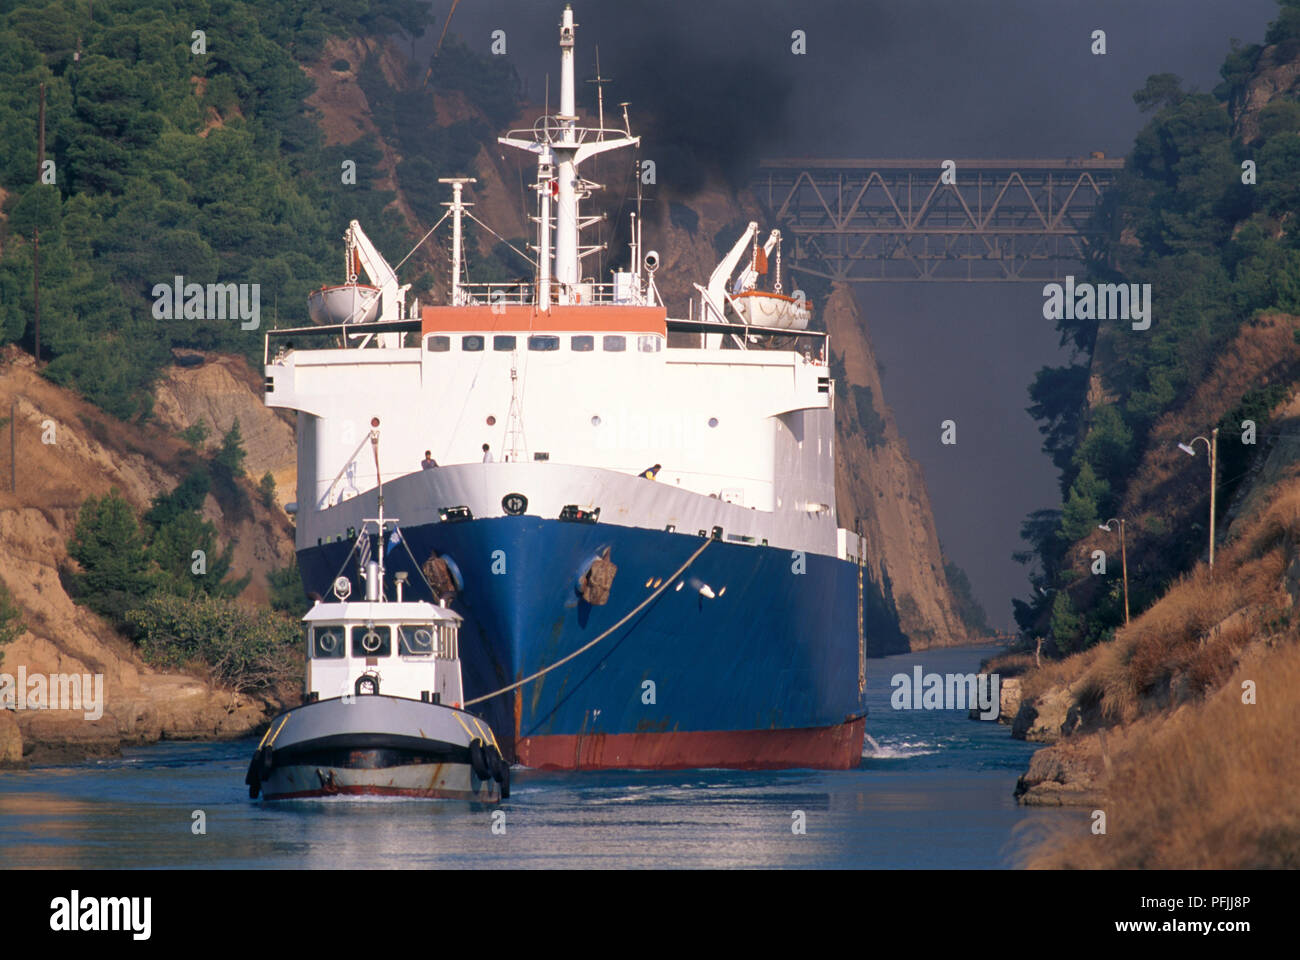 Greece, Peloponnese, tugboat guiding ship through the Corinth Canal, with railroad bridge overhead Stock Photo